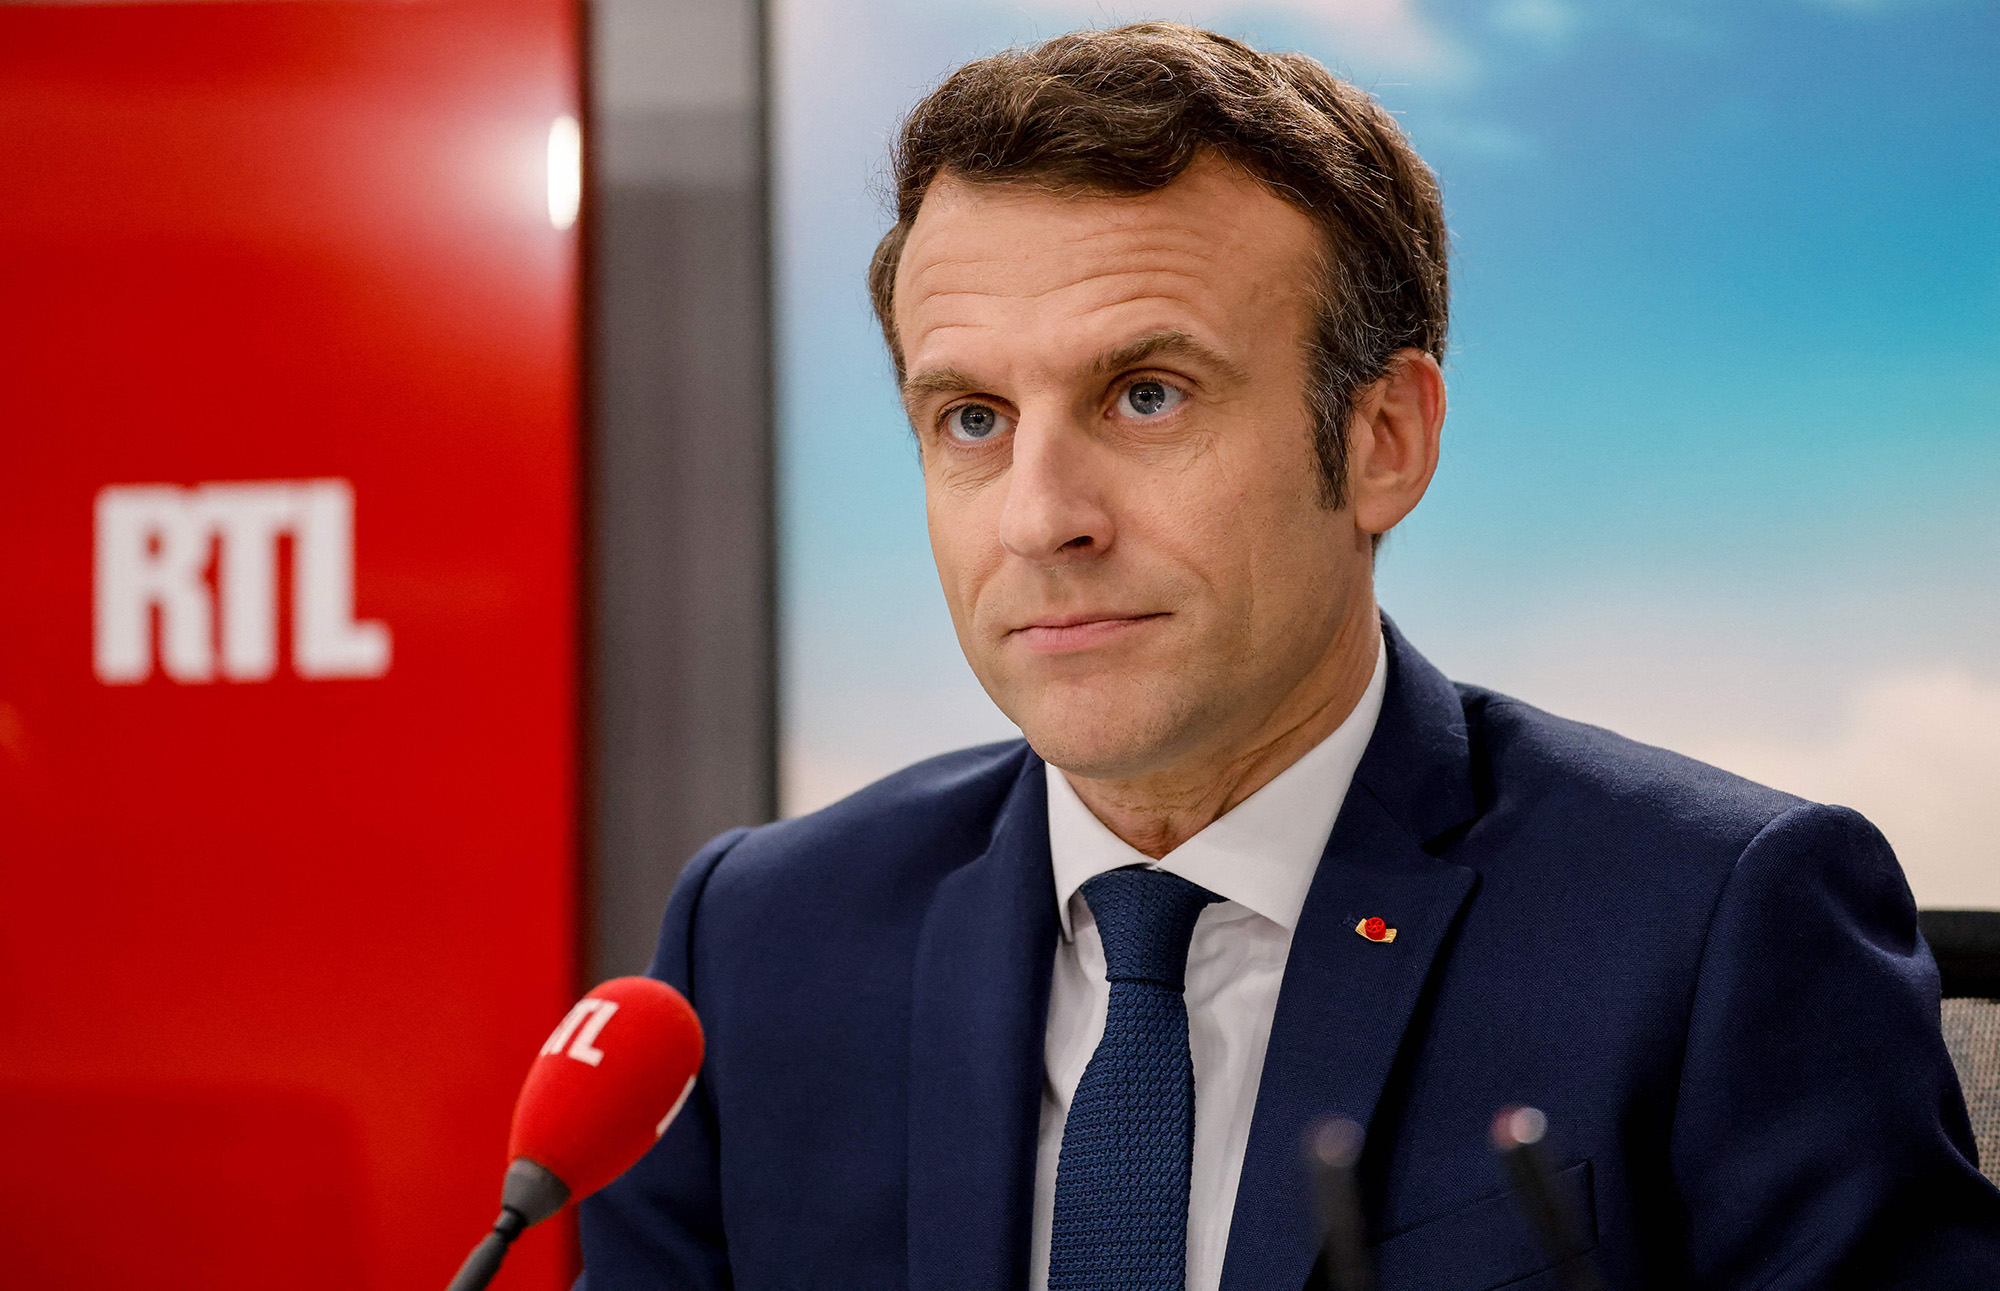 French President Emmanuel Macron gives an interview to RTL radio in Neuilly-sur-Seine, France, on April 8.